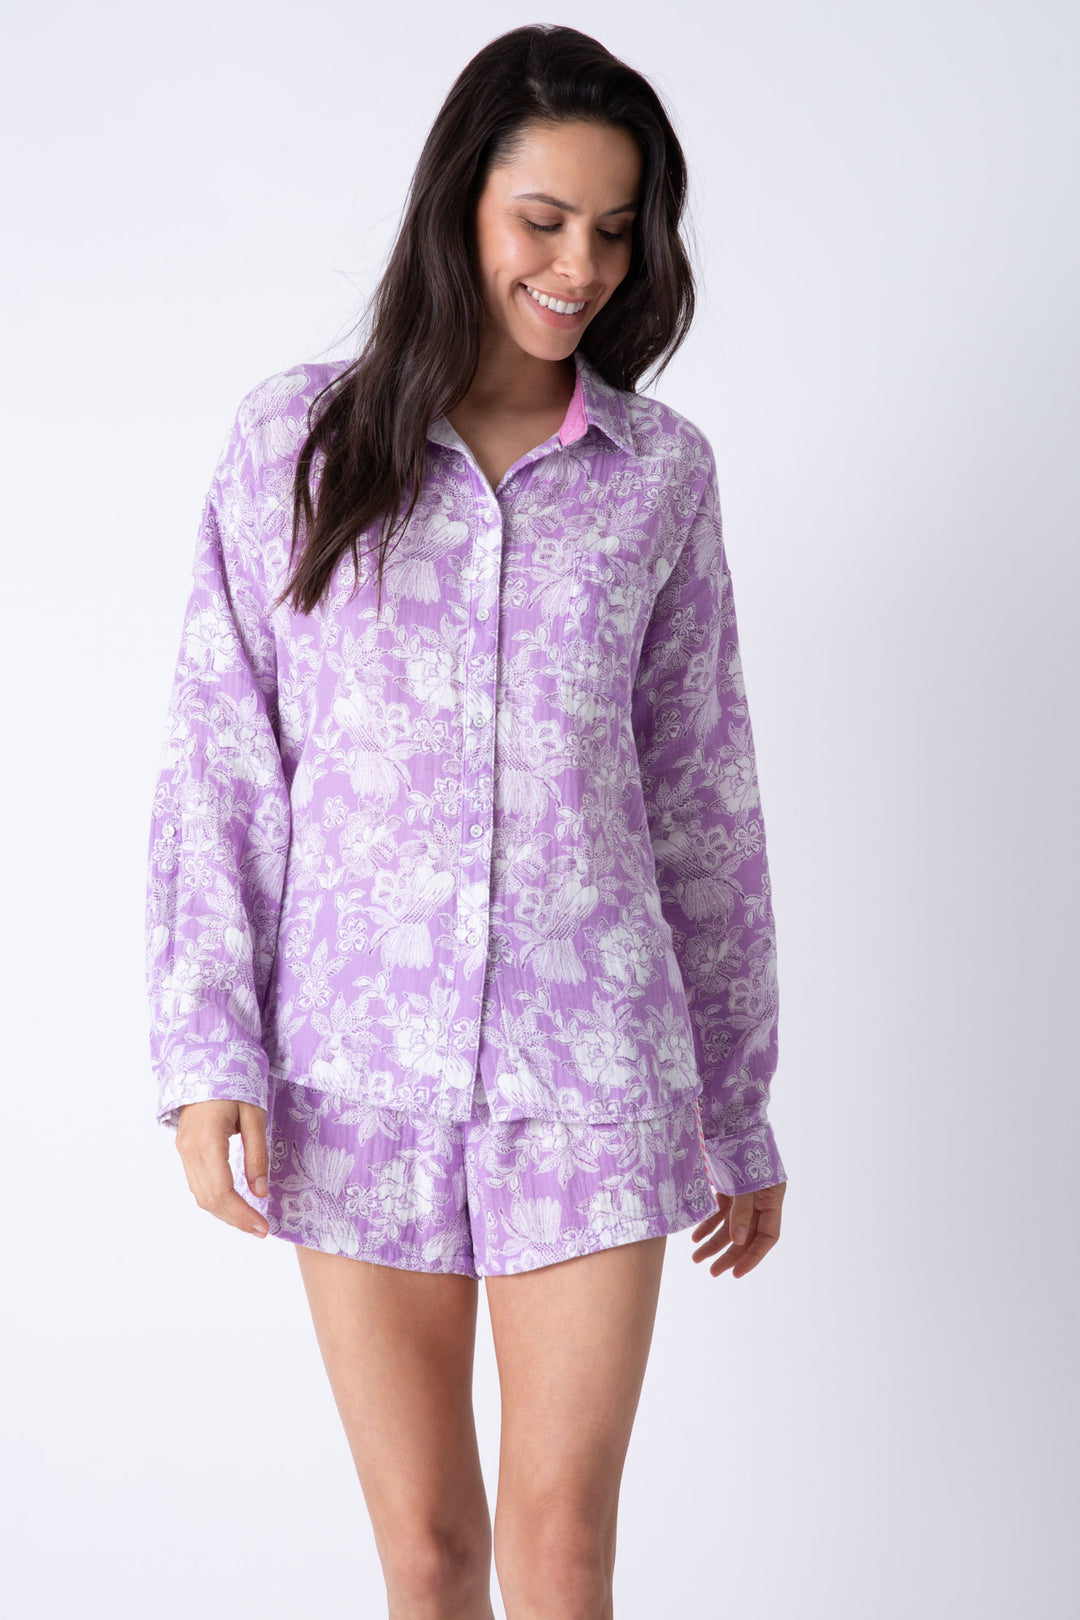 Cotton gauze women's button-down collared shirt in pale purple floral.